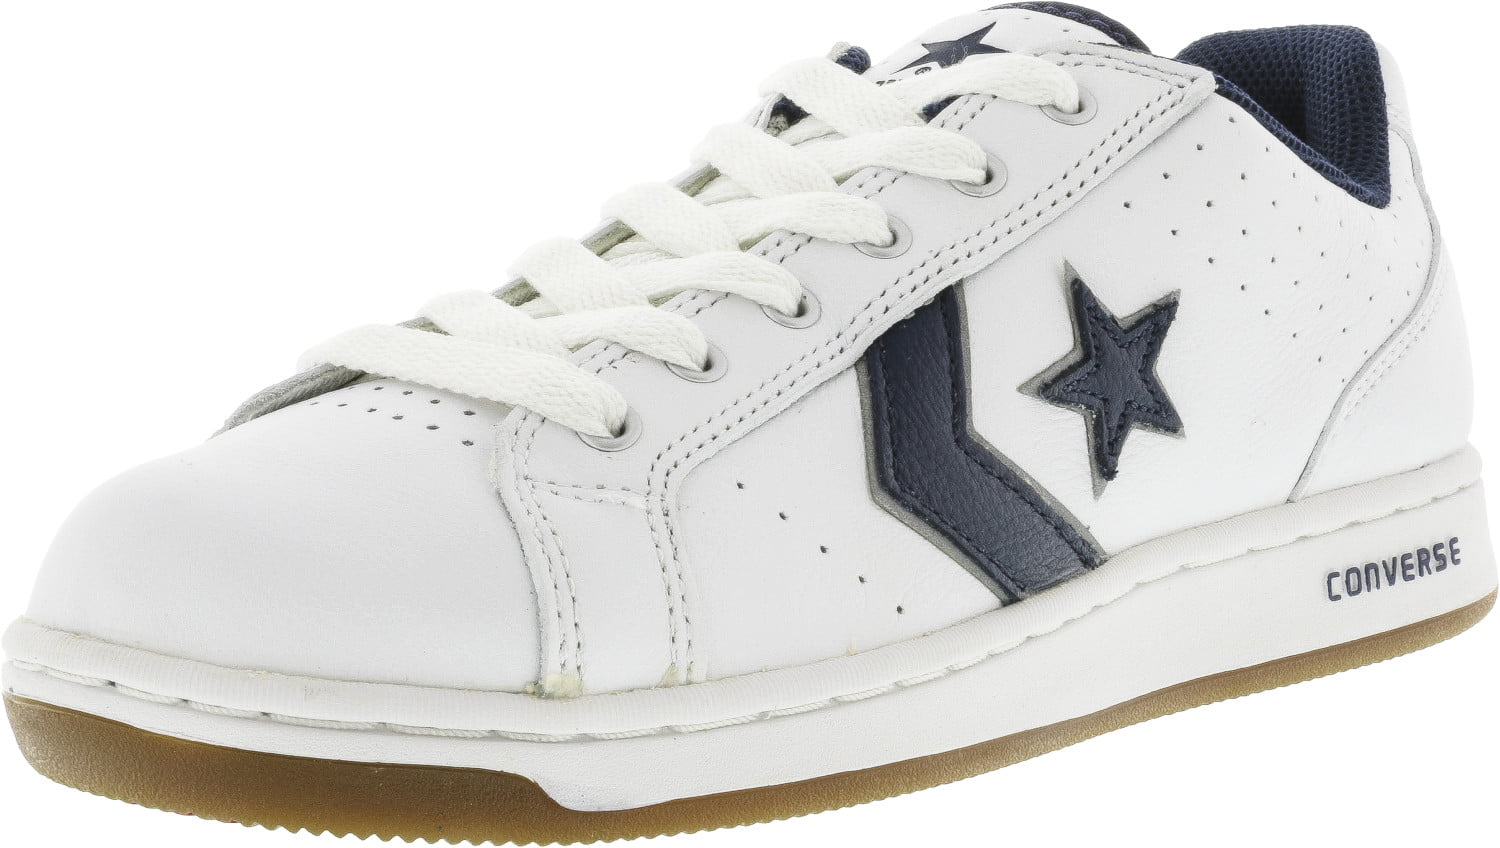 navy converse leather